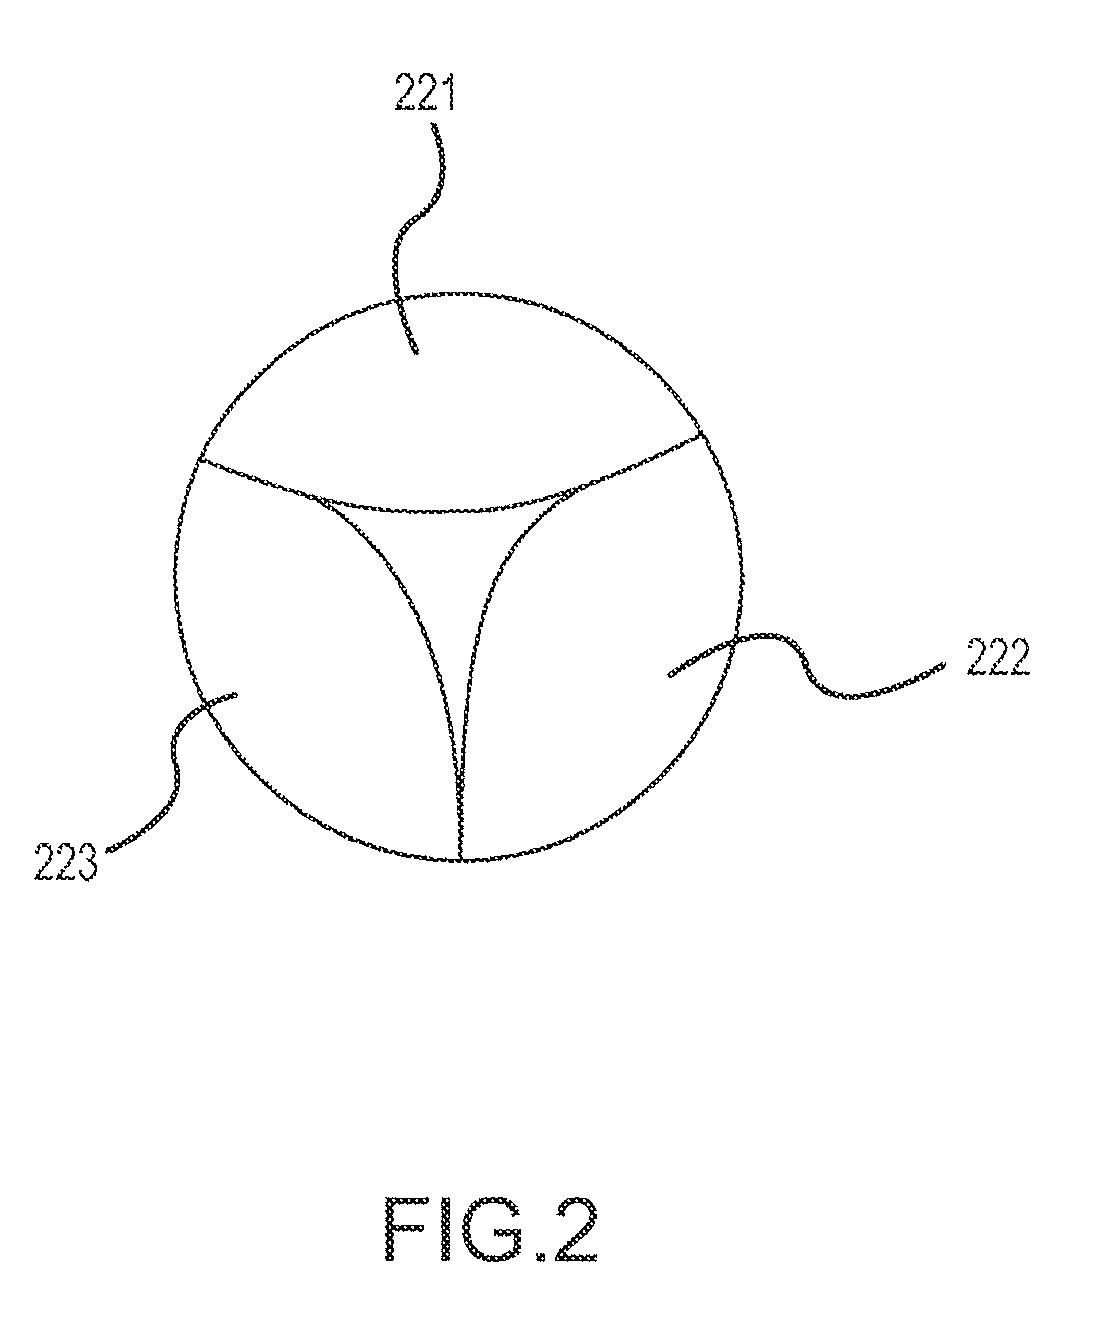 Percutaneously implantable replacement heart valve device and method of making same